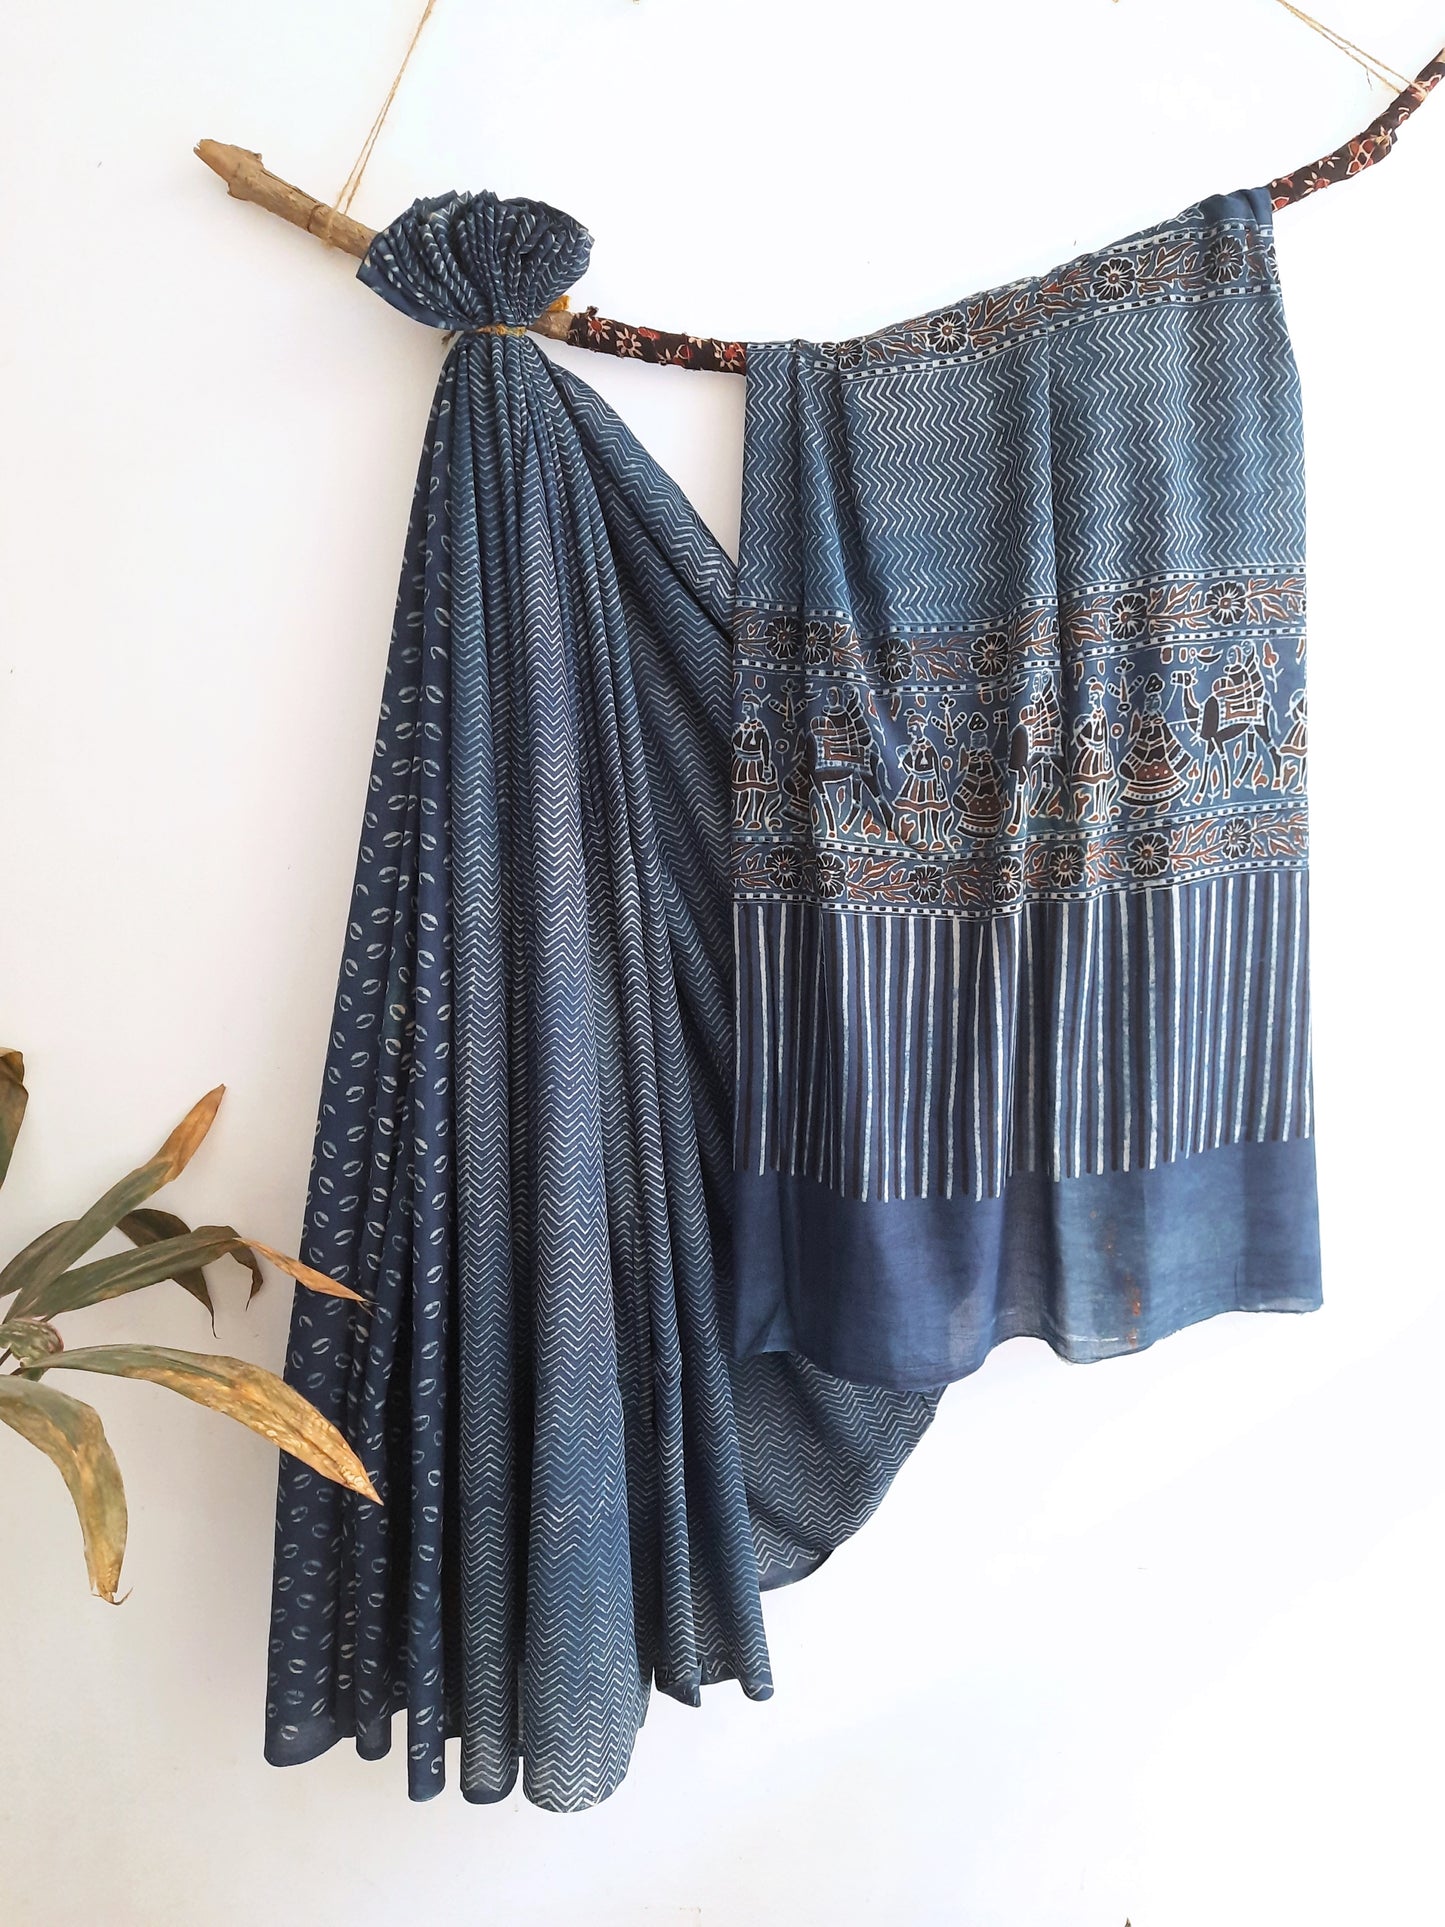 Indigo-dyed Ajrakh hand block printed saree crafted in pure cotton by Turquoisethestore, a blend of comfort and style.